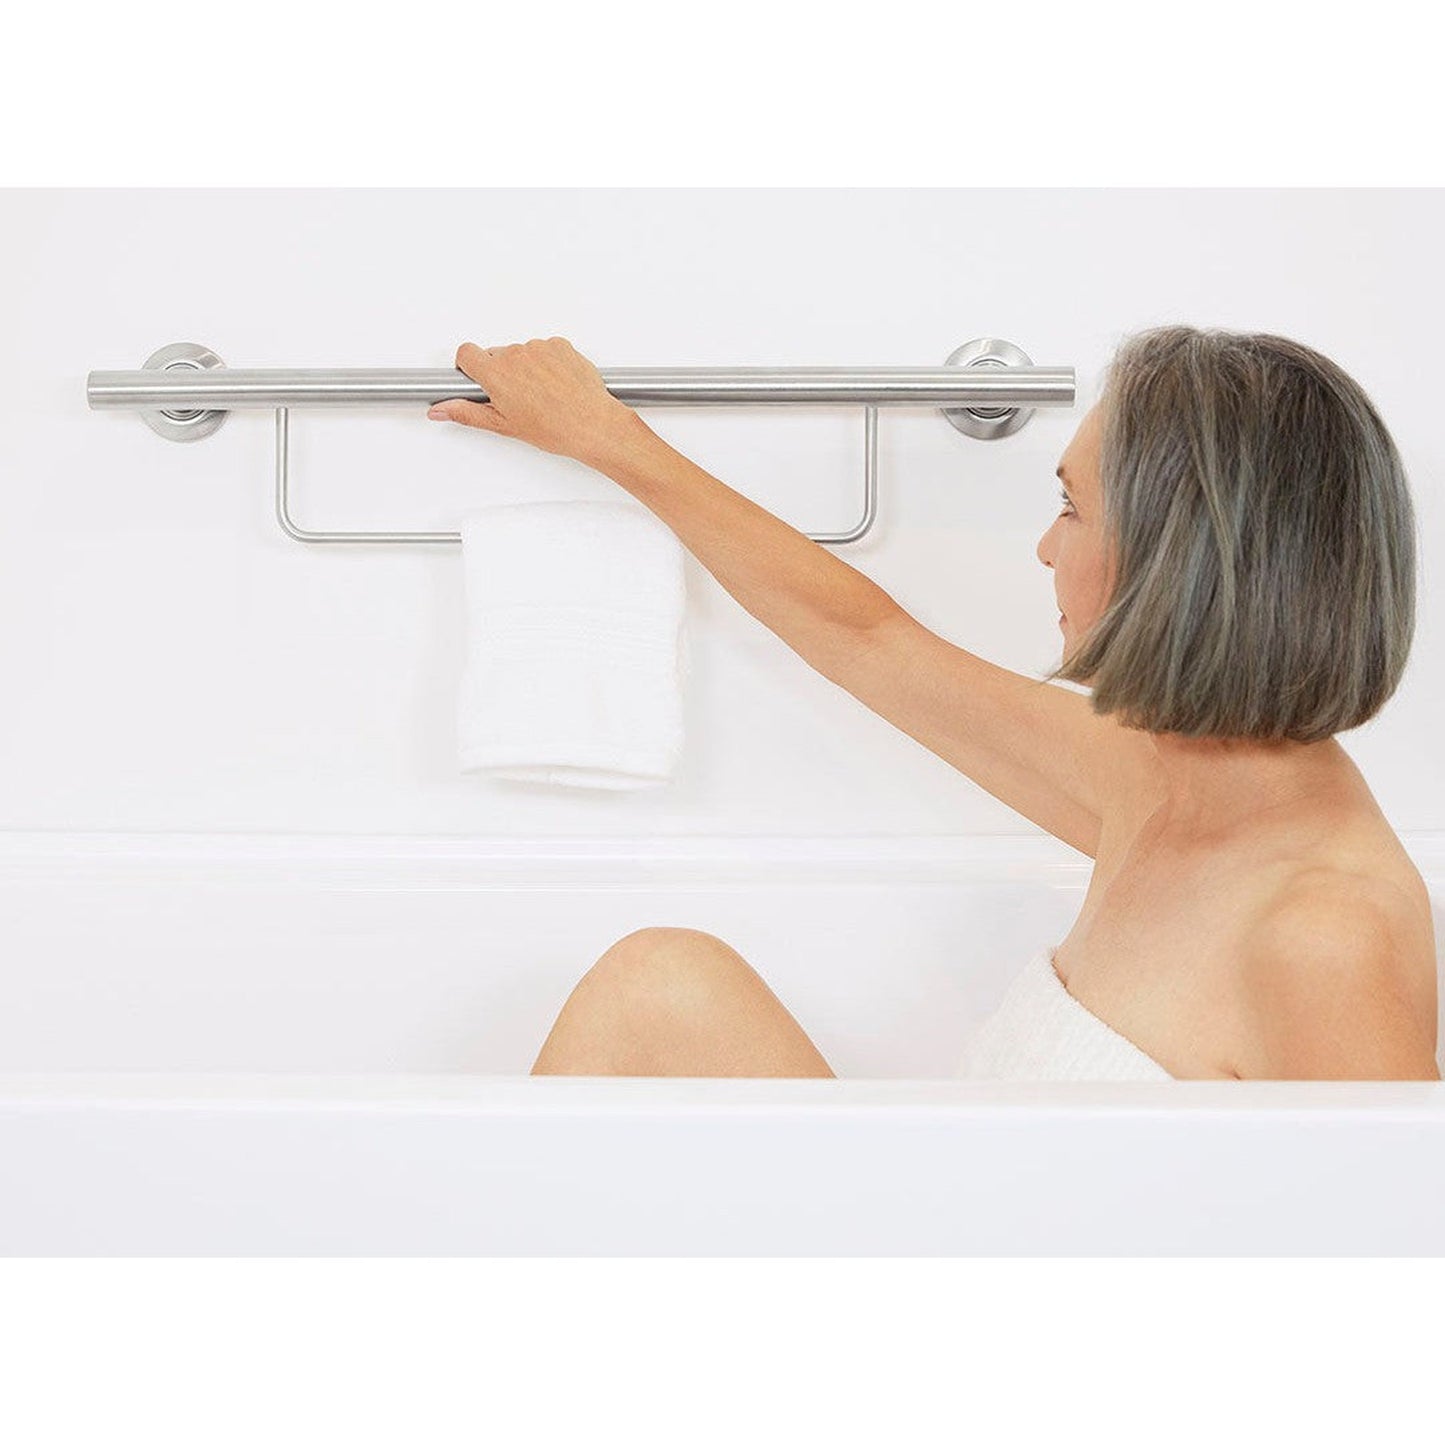 Seachrome Lifestyle & Wellness Series 30" Satin Stainless Steel 1.25 Diameter Concealed Flange Newport Grab Bar With Towel Bar